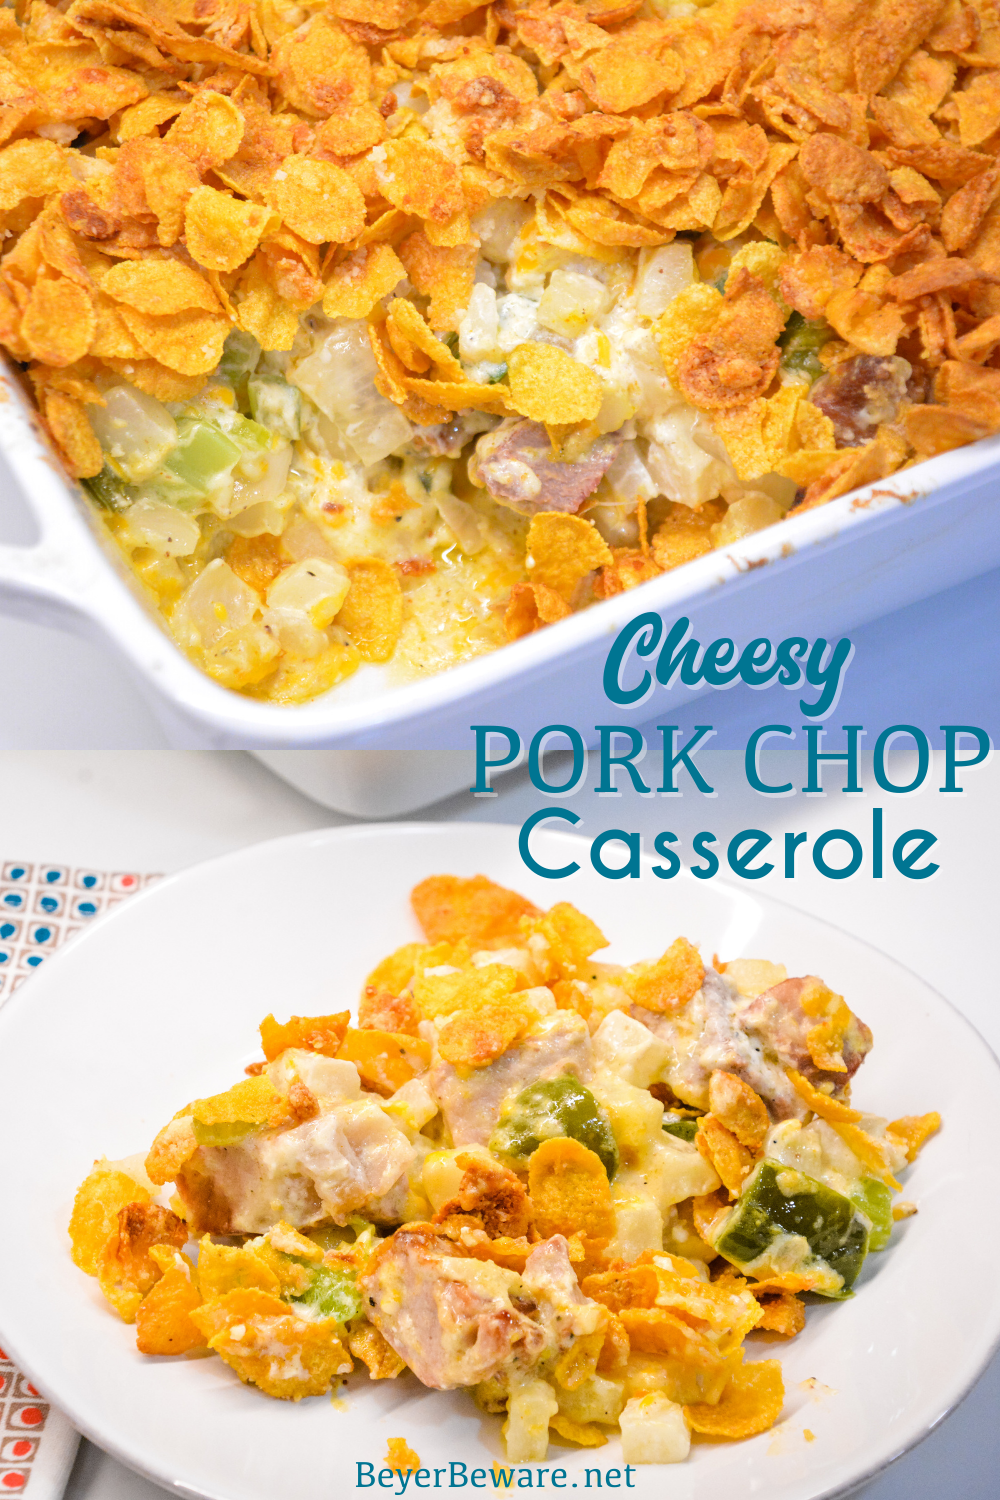 Cheesy pork chop casserole is the perfect way to use leftover pork chops hide veggies and beans in this hash brown and pork chop recipe.